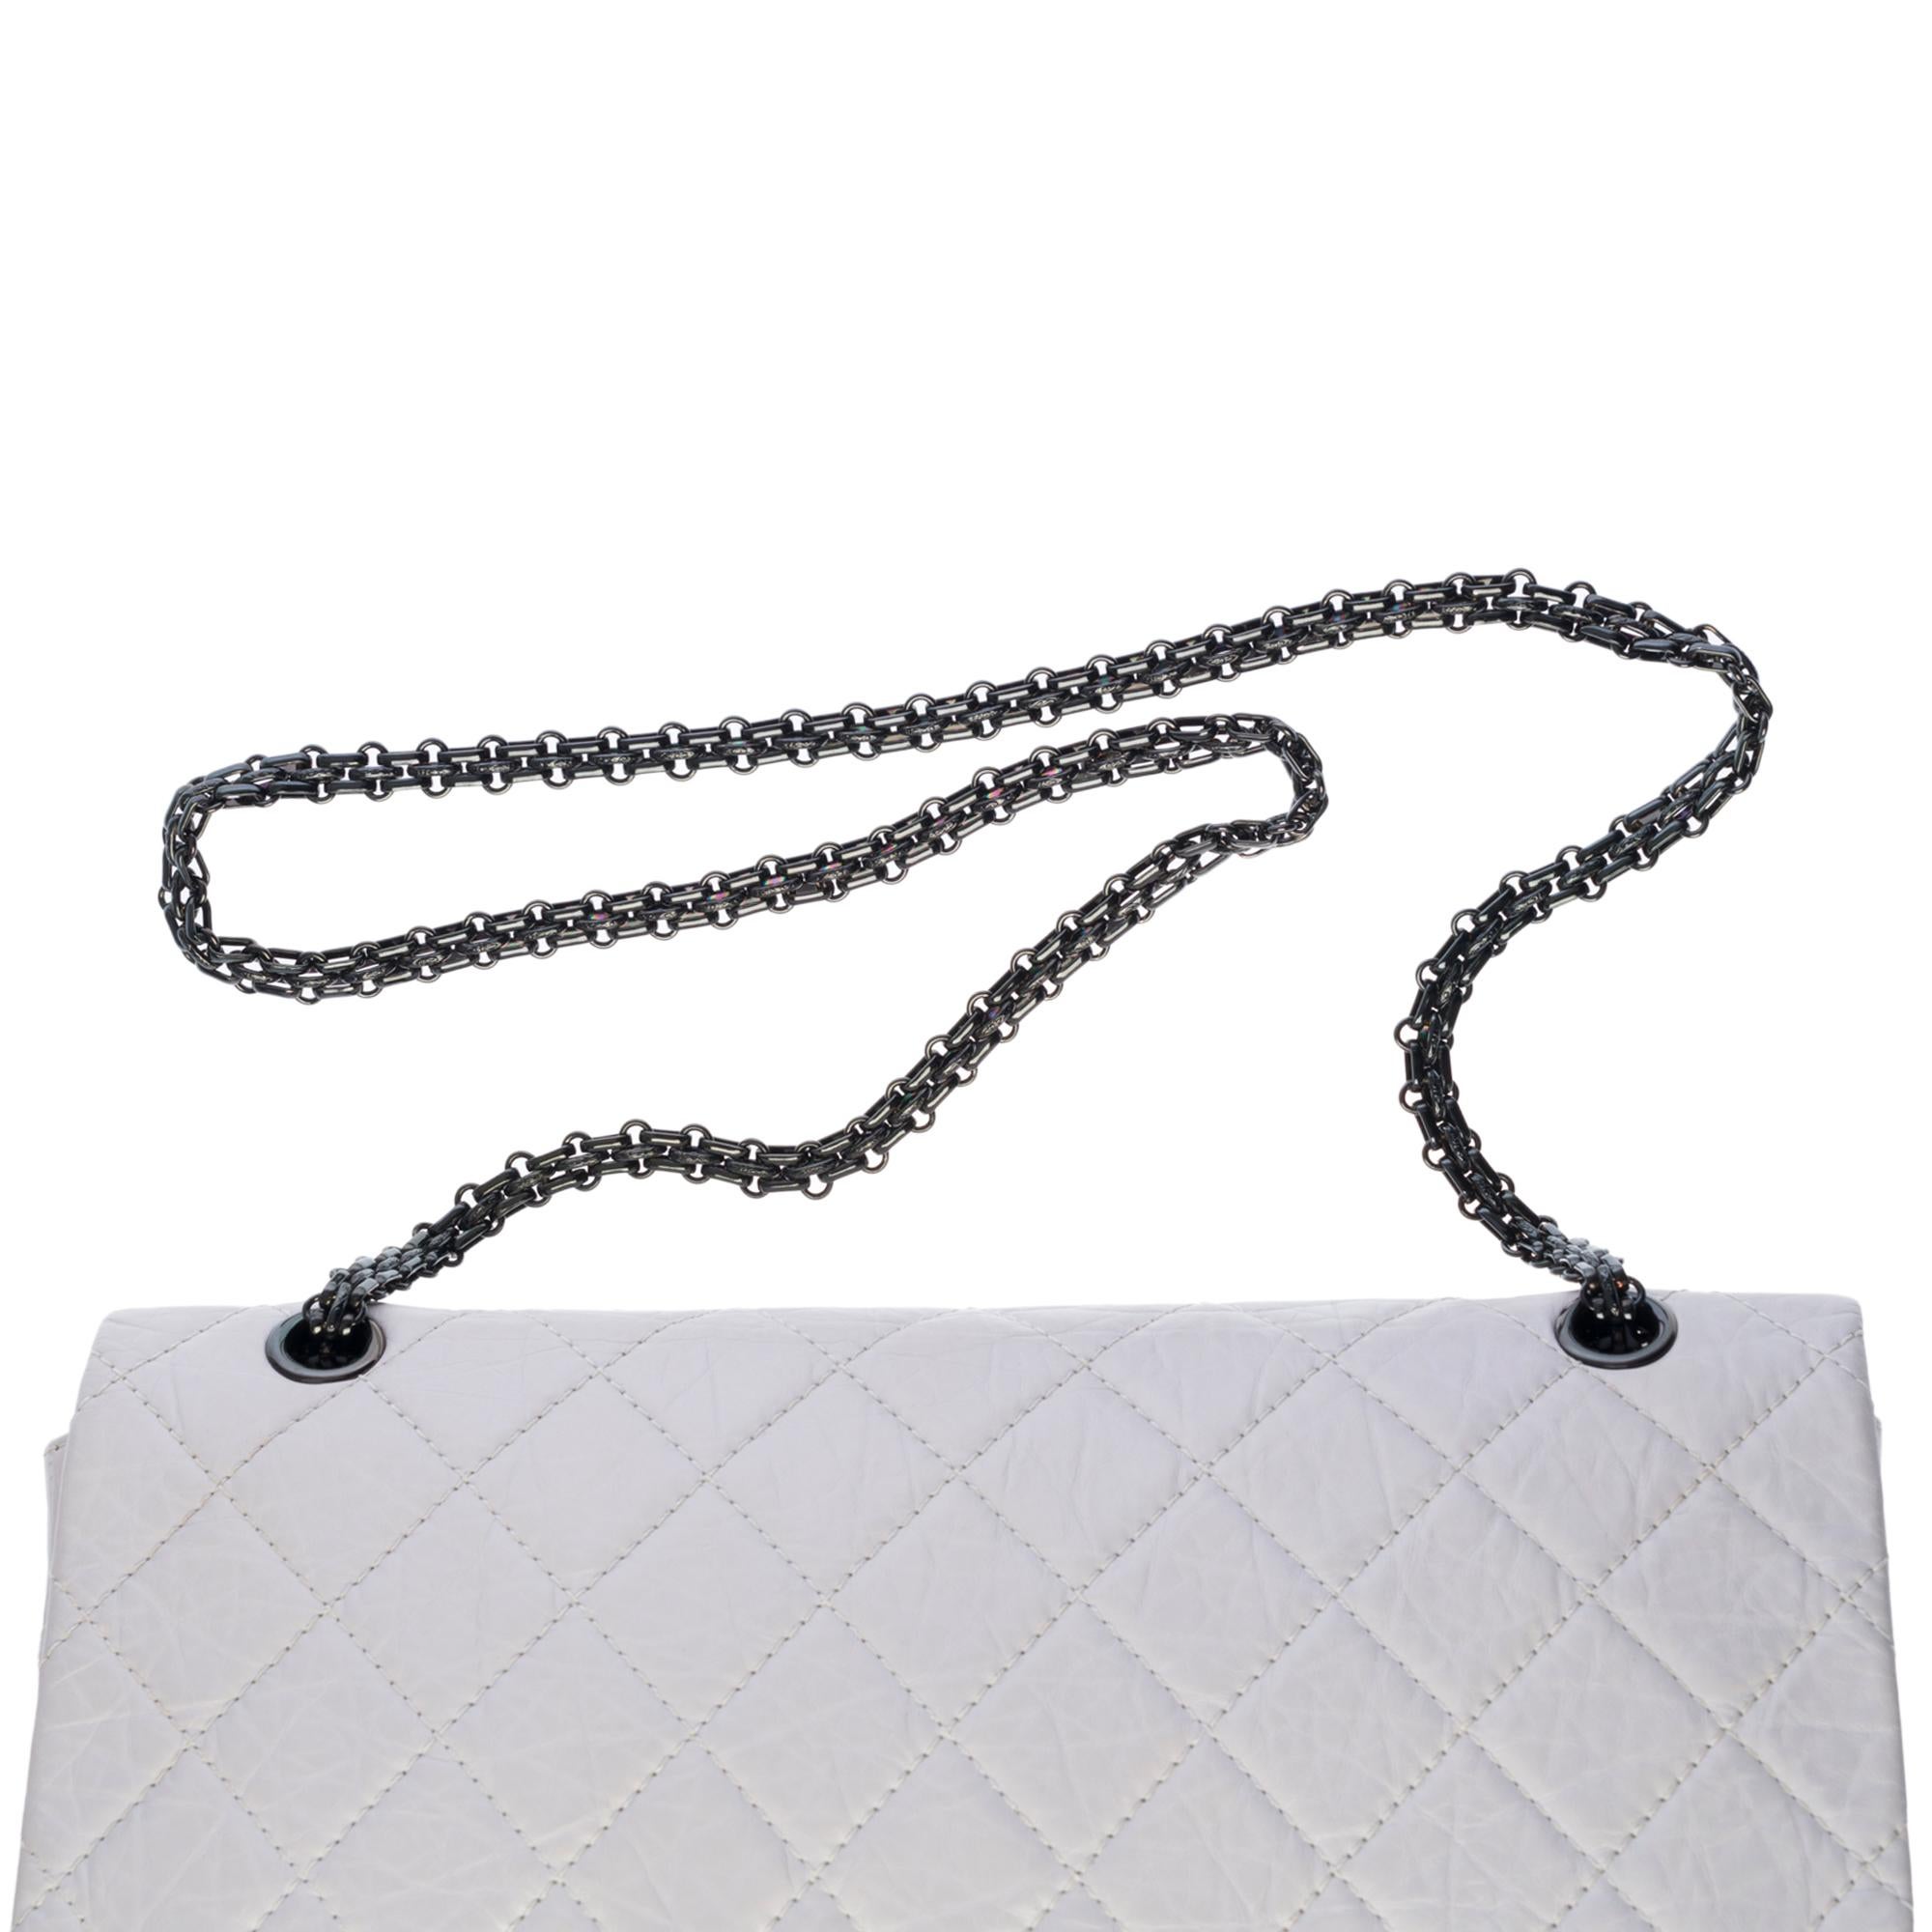 Women's Chanel 2.55 Reissue 227  shoulder bag in White quilted leather, black silver HW